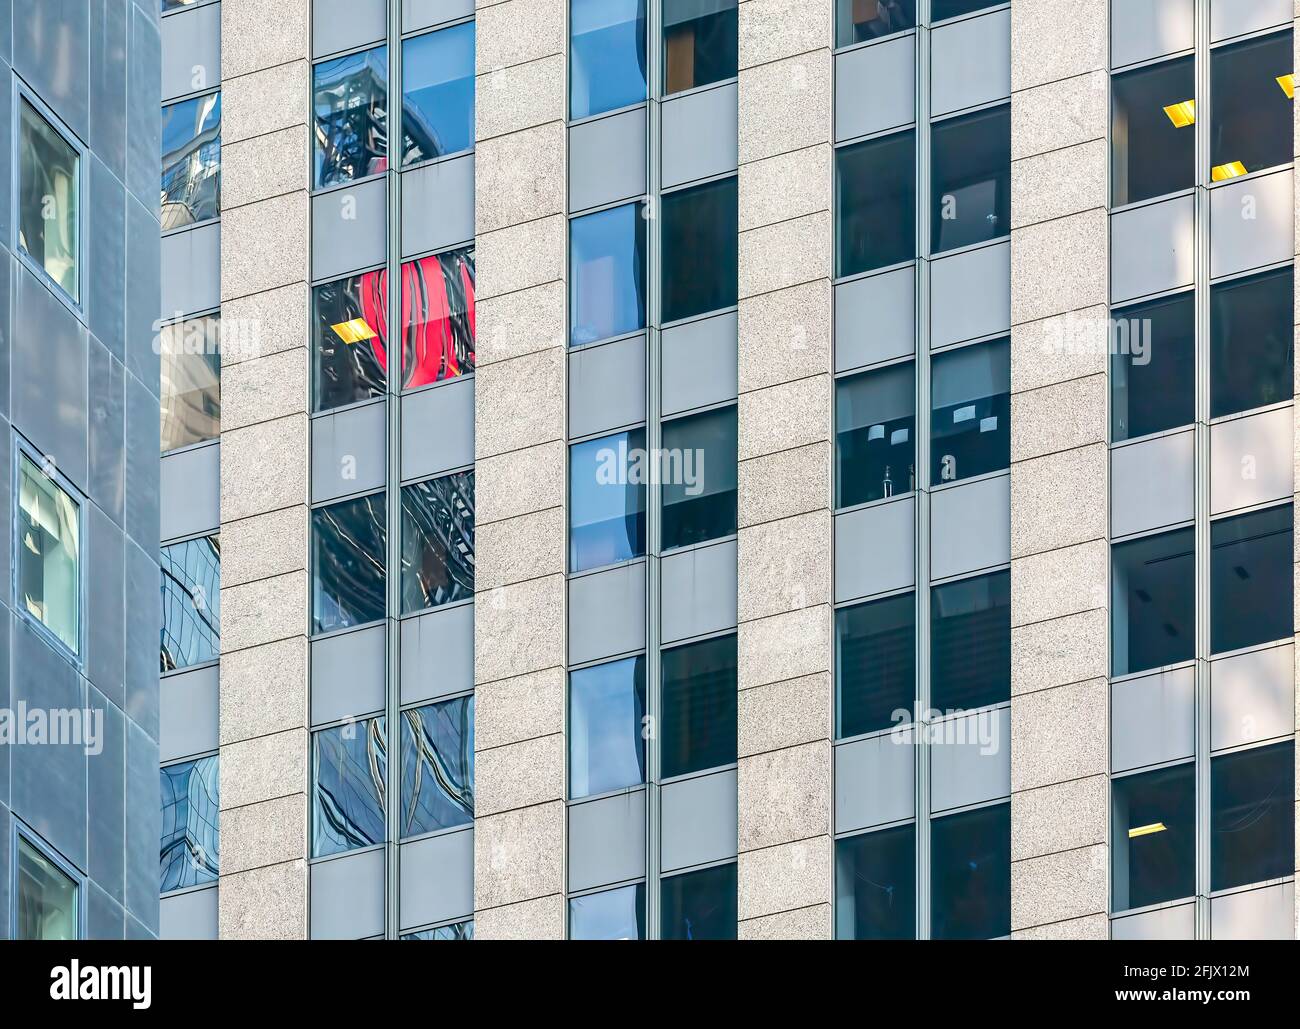 Glass and stone grid in Midtown Manhattan. Stock Photo